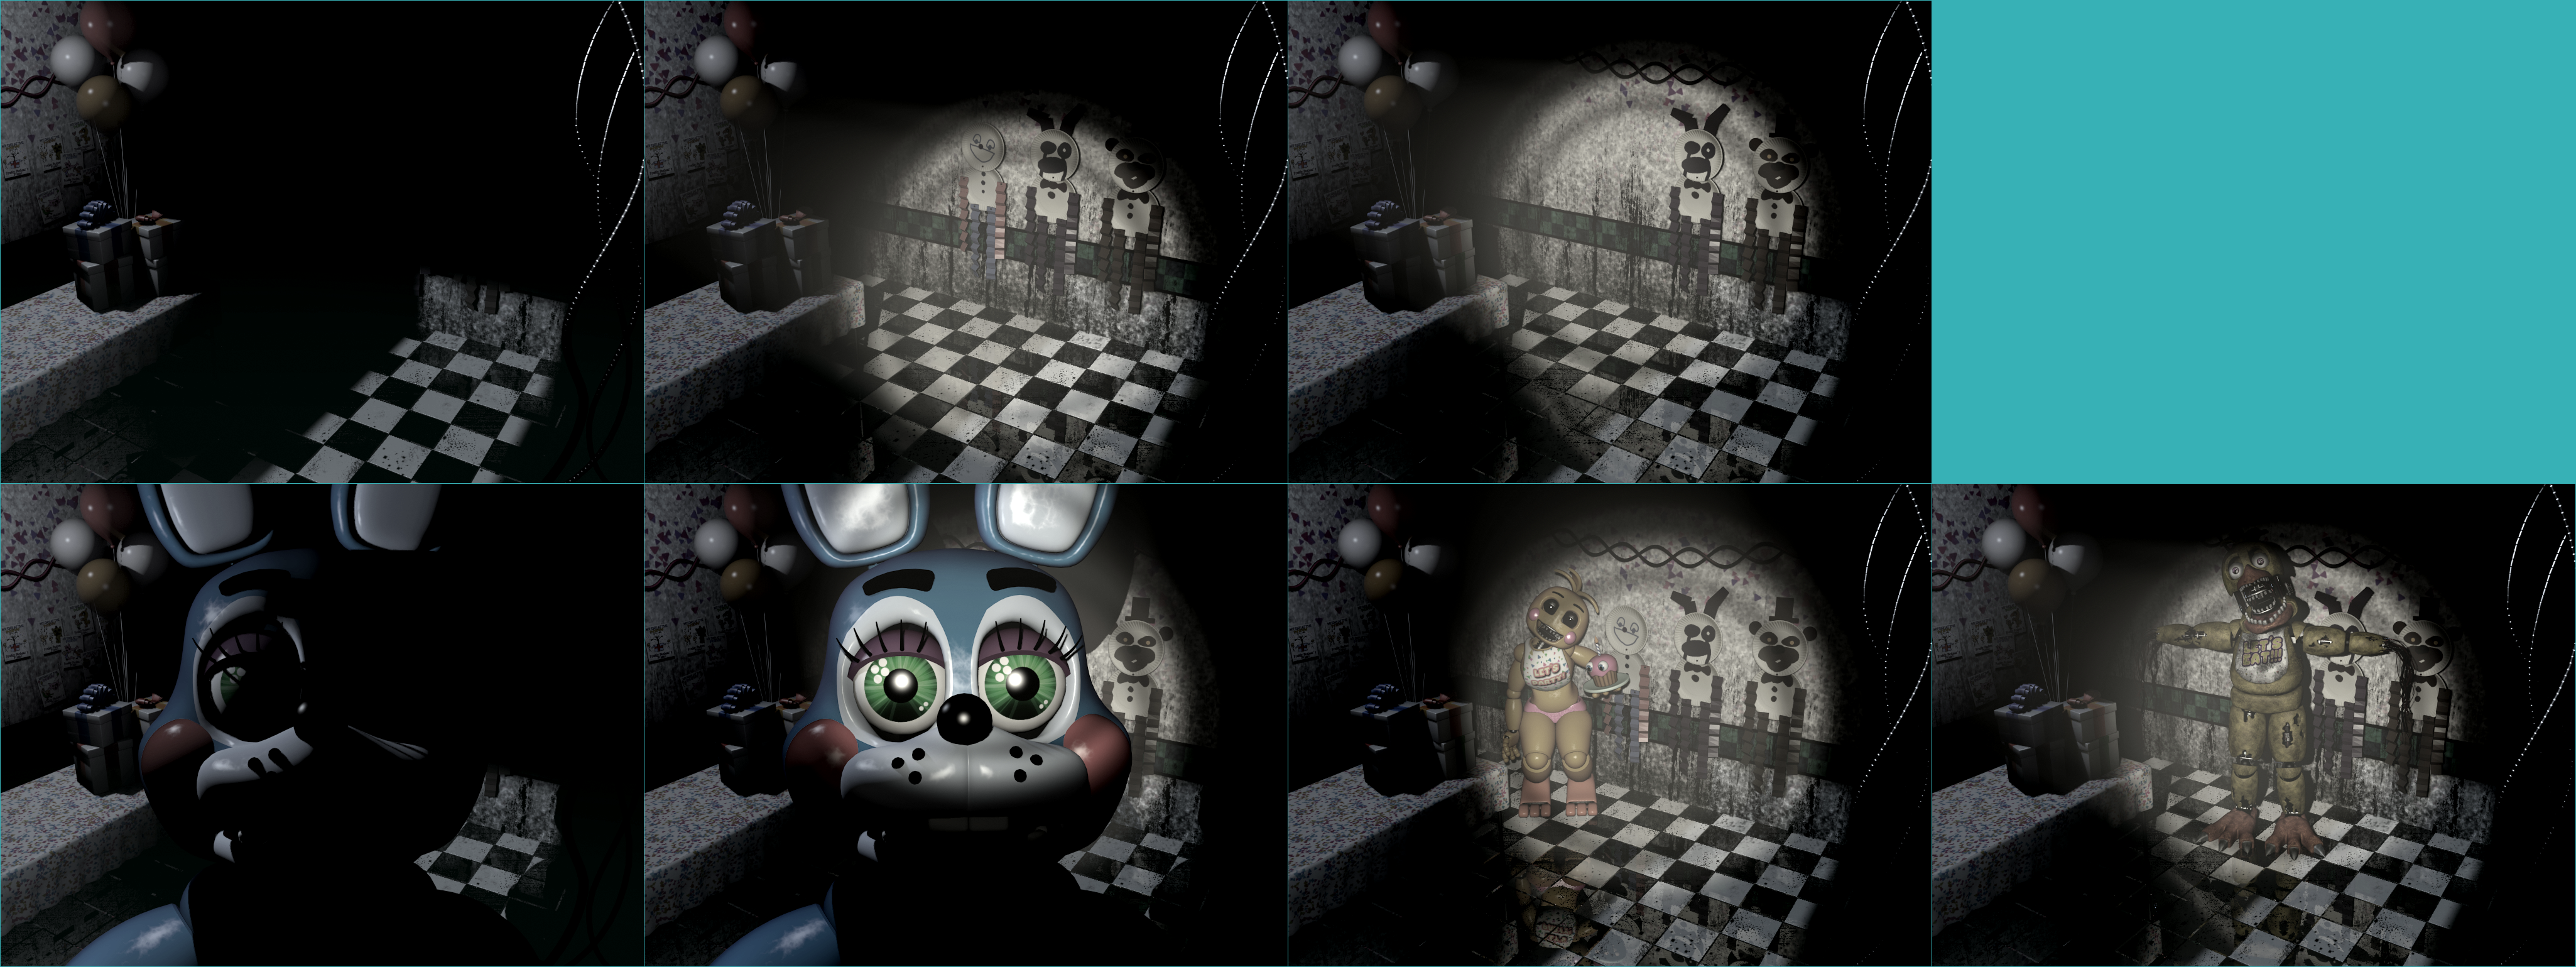 Five Nights at Freddy's 2 - Party Room 4